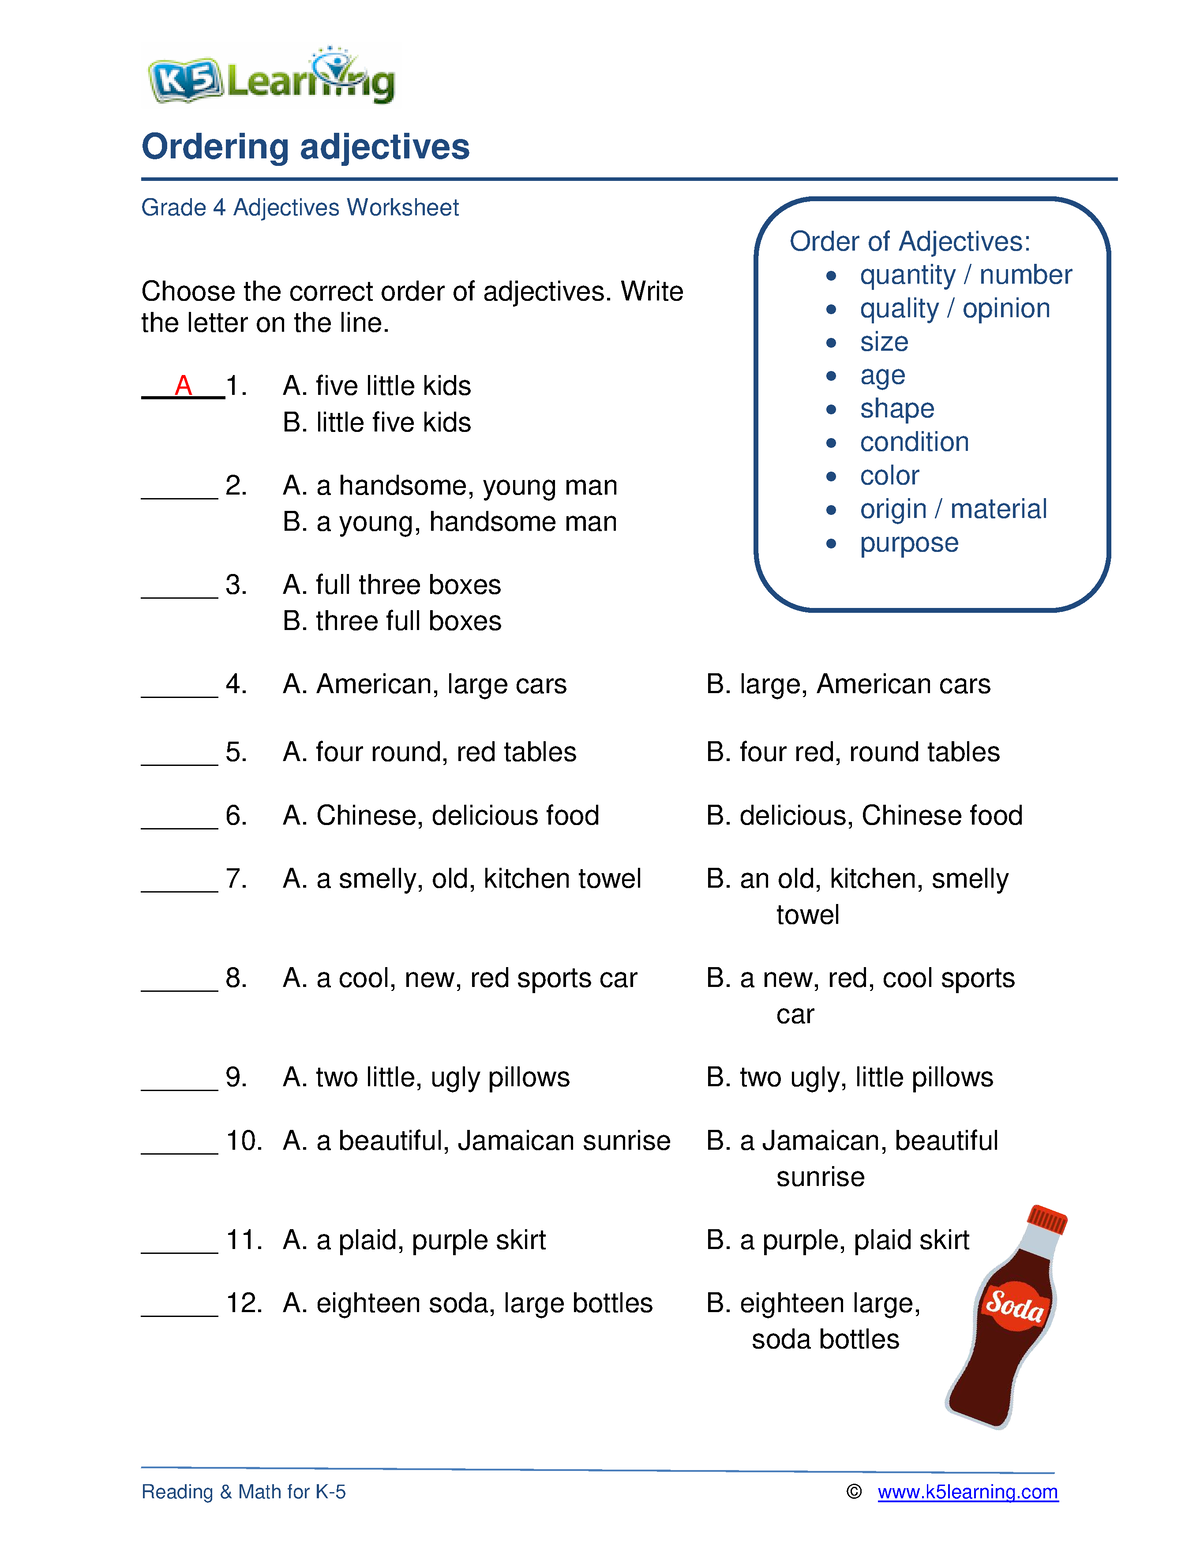 grade-4-ordering-adjectives-a-ordering-adjectives-grade-4-adjectives-worksheet-reading-math